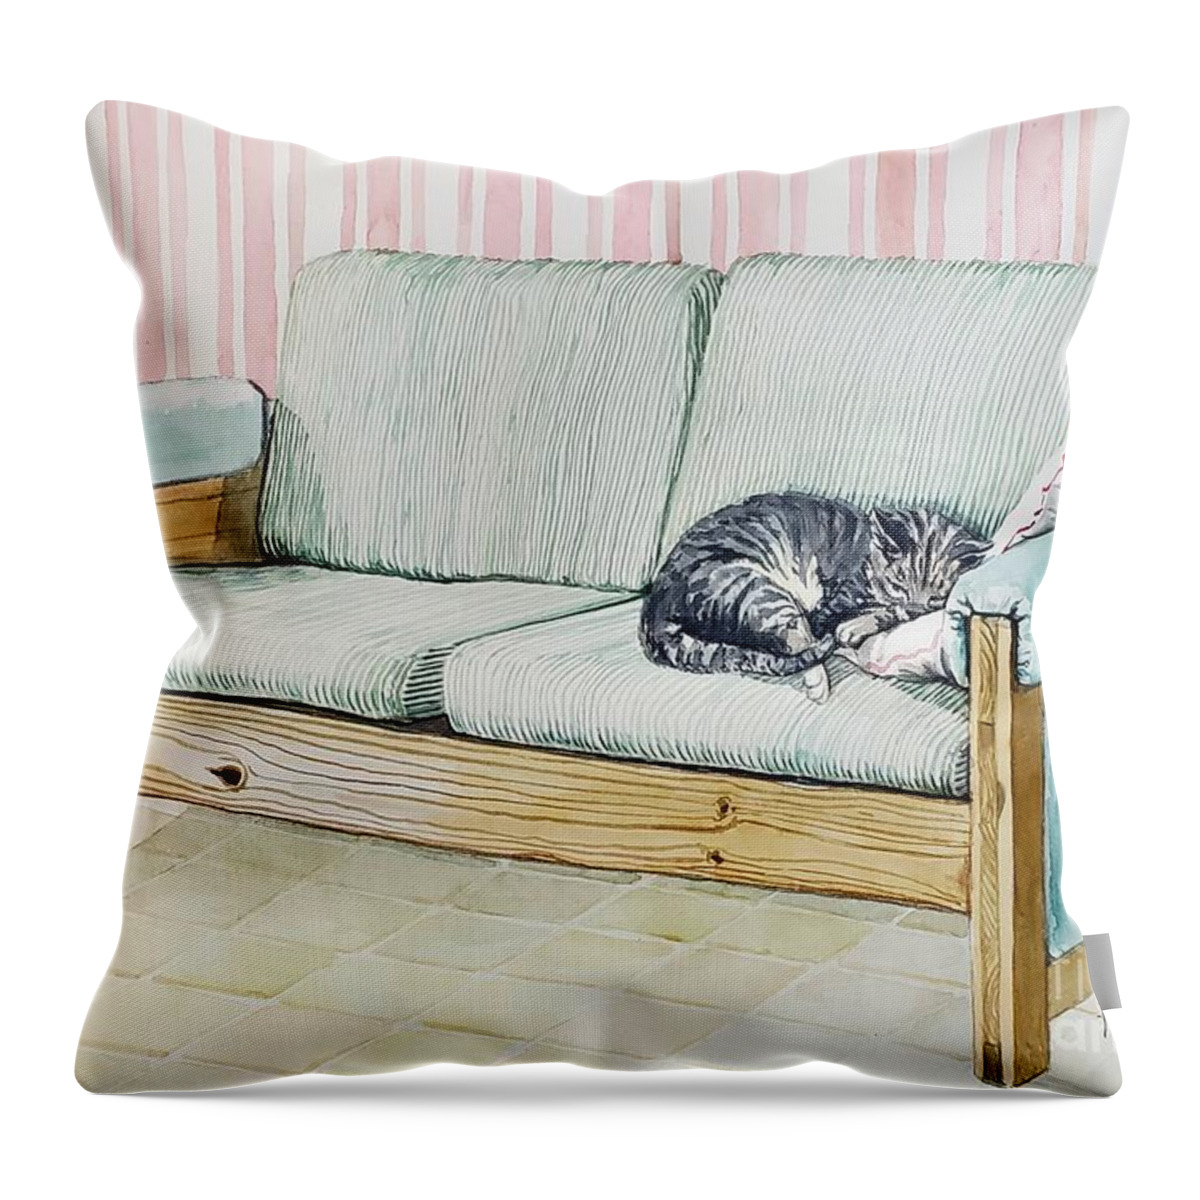 Still Life Throw Pillow featuring the painting A Study in Stripes by Merana Cadorette